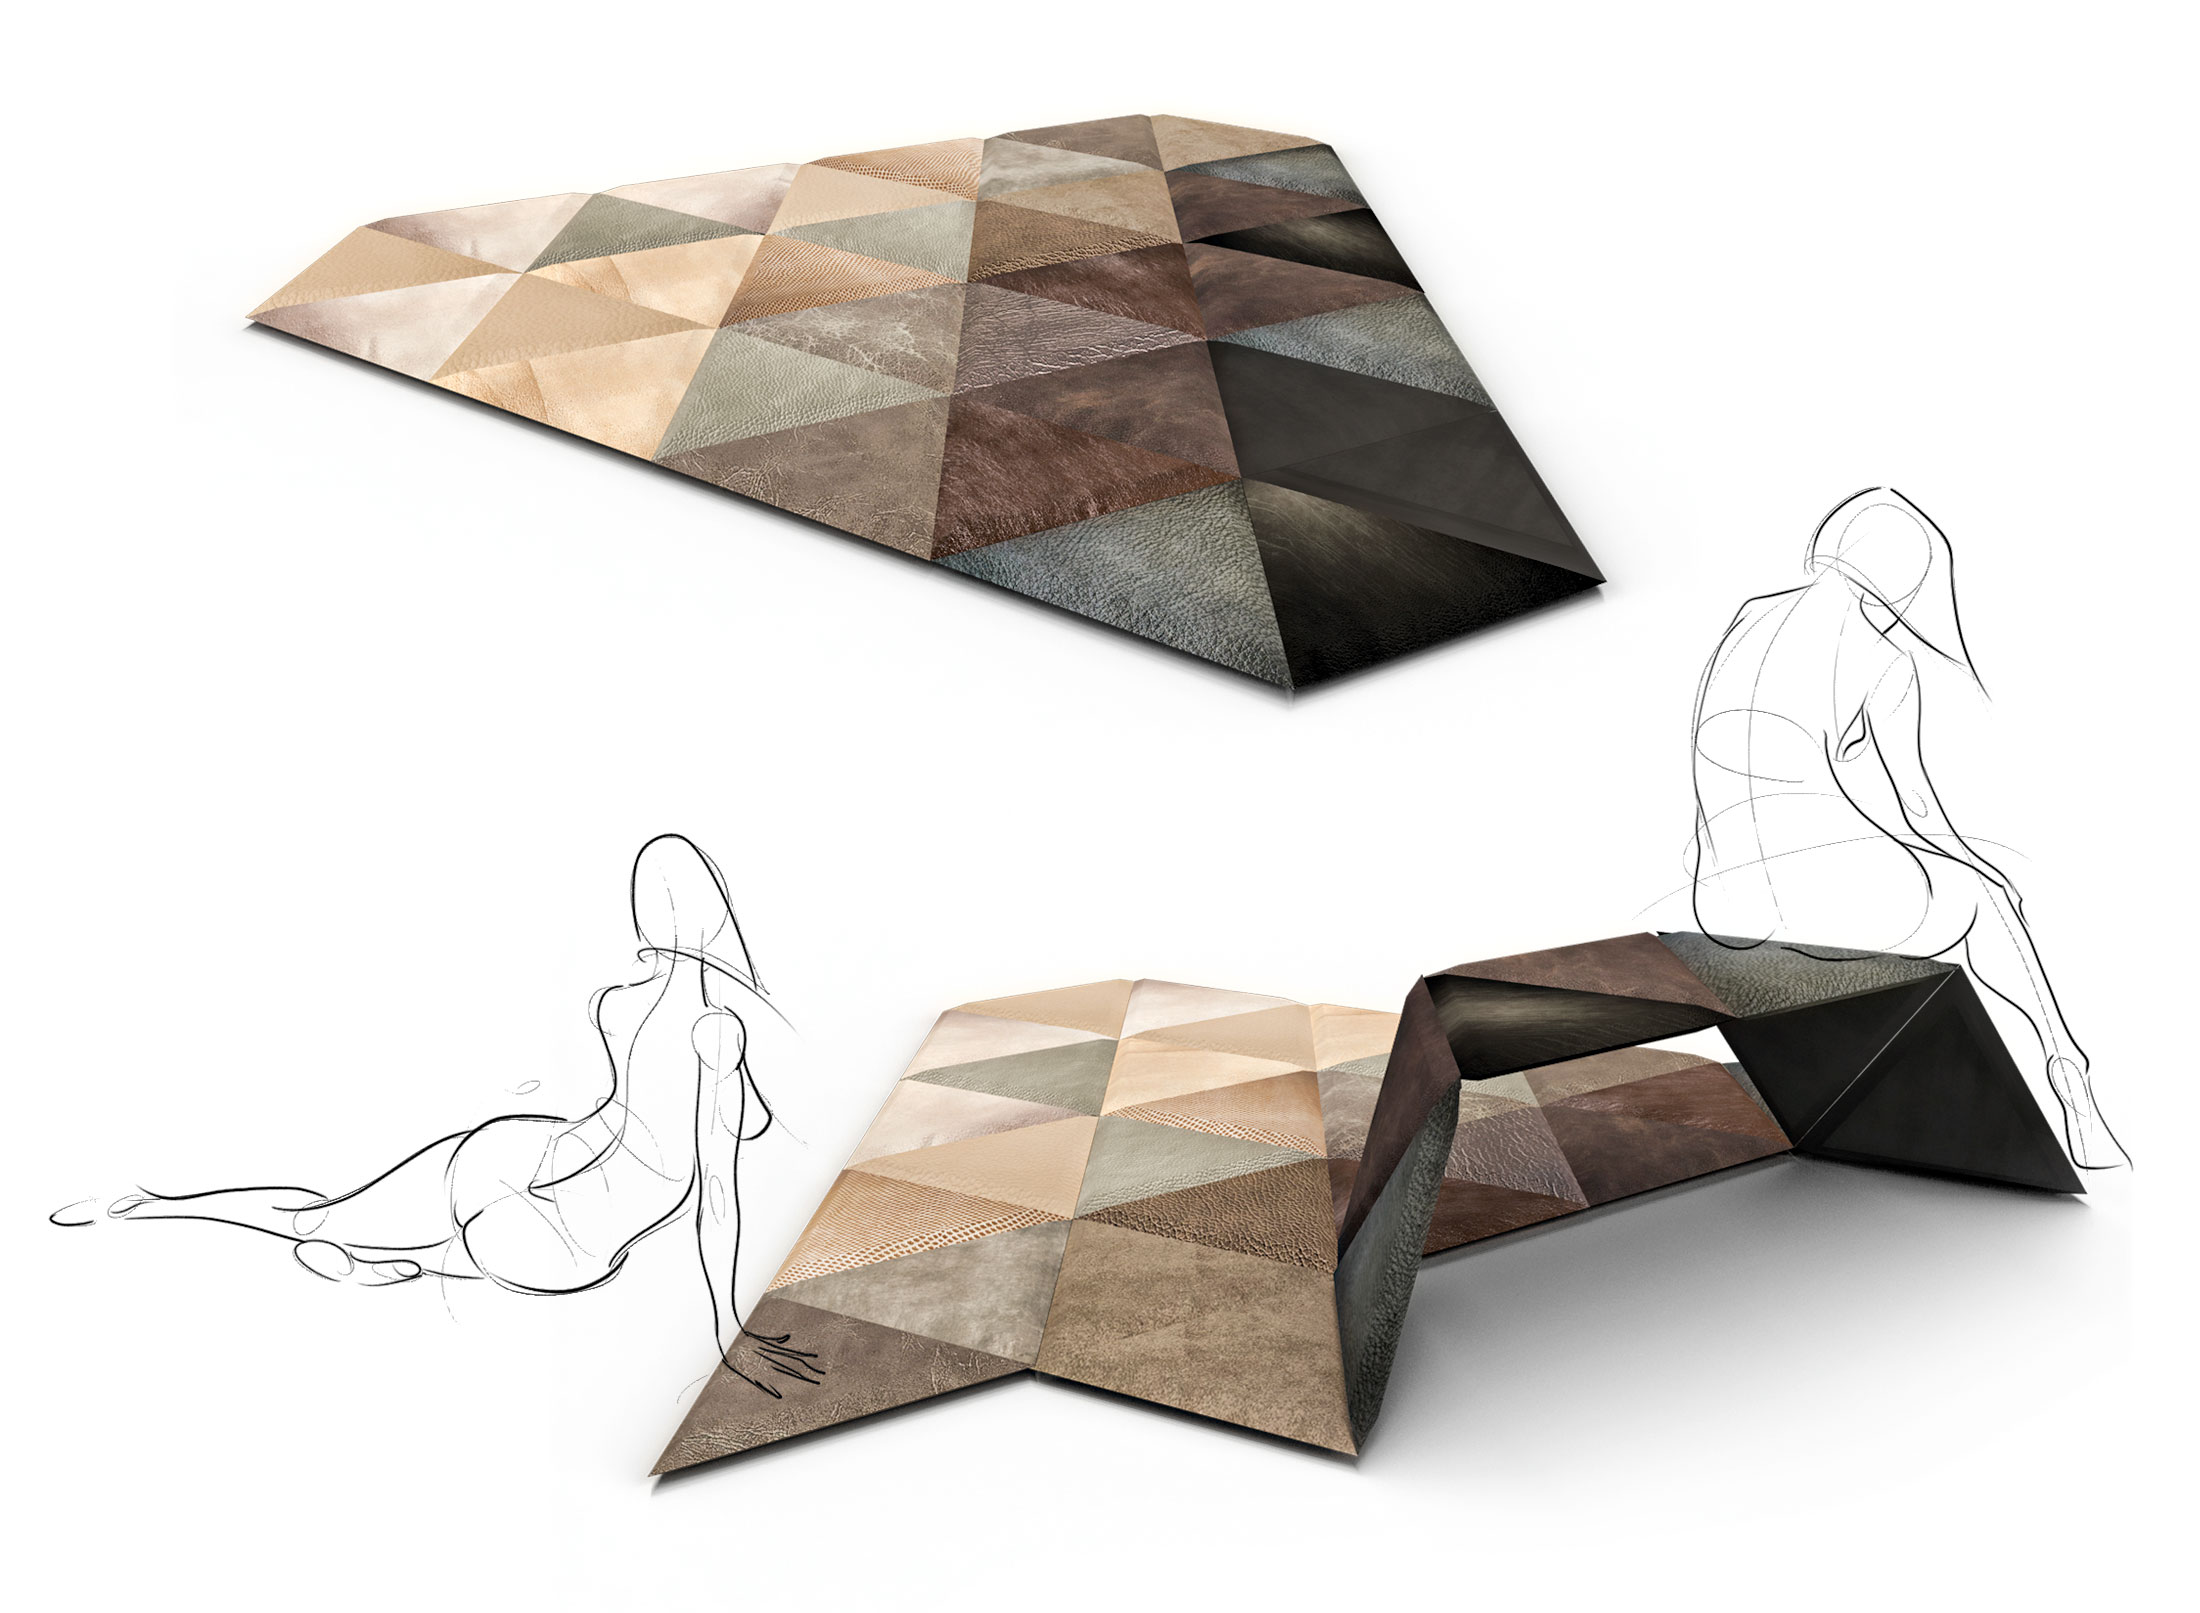 views of 'Equilaterre' morphing triangular leather rug by Inkrypted - Rita Abou Arraj